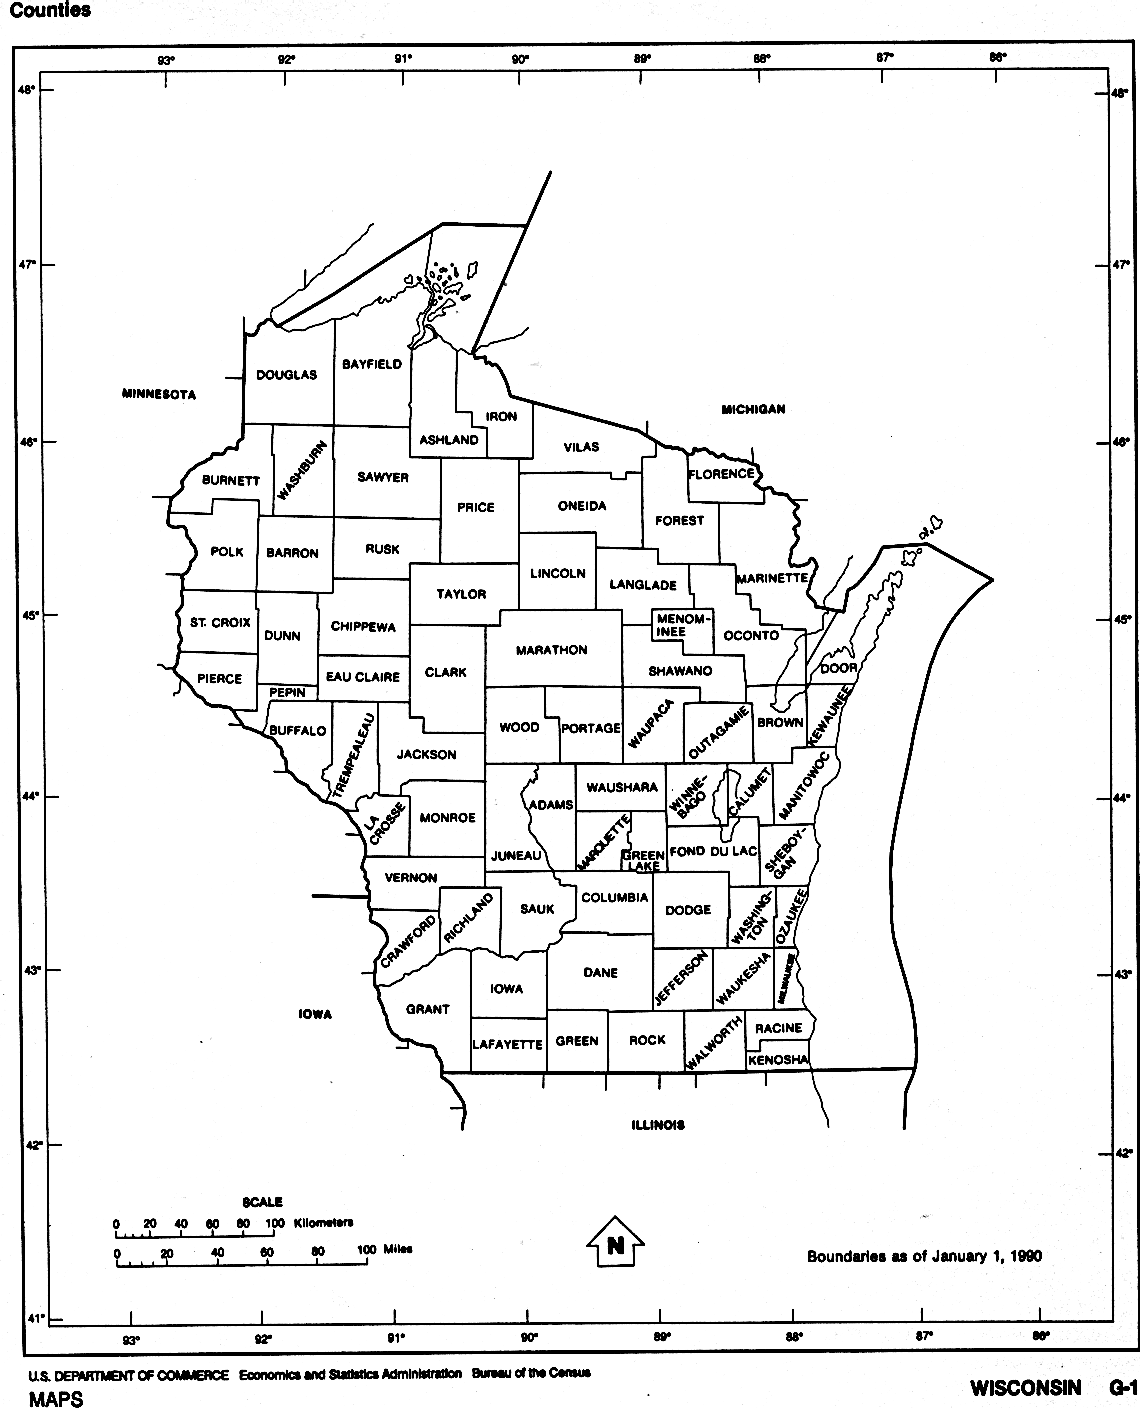 Wisconsin Counties map with outline and location of each county in WI